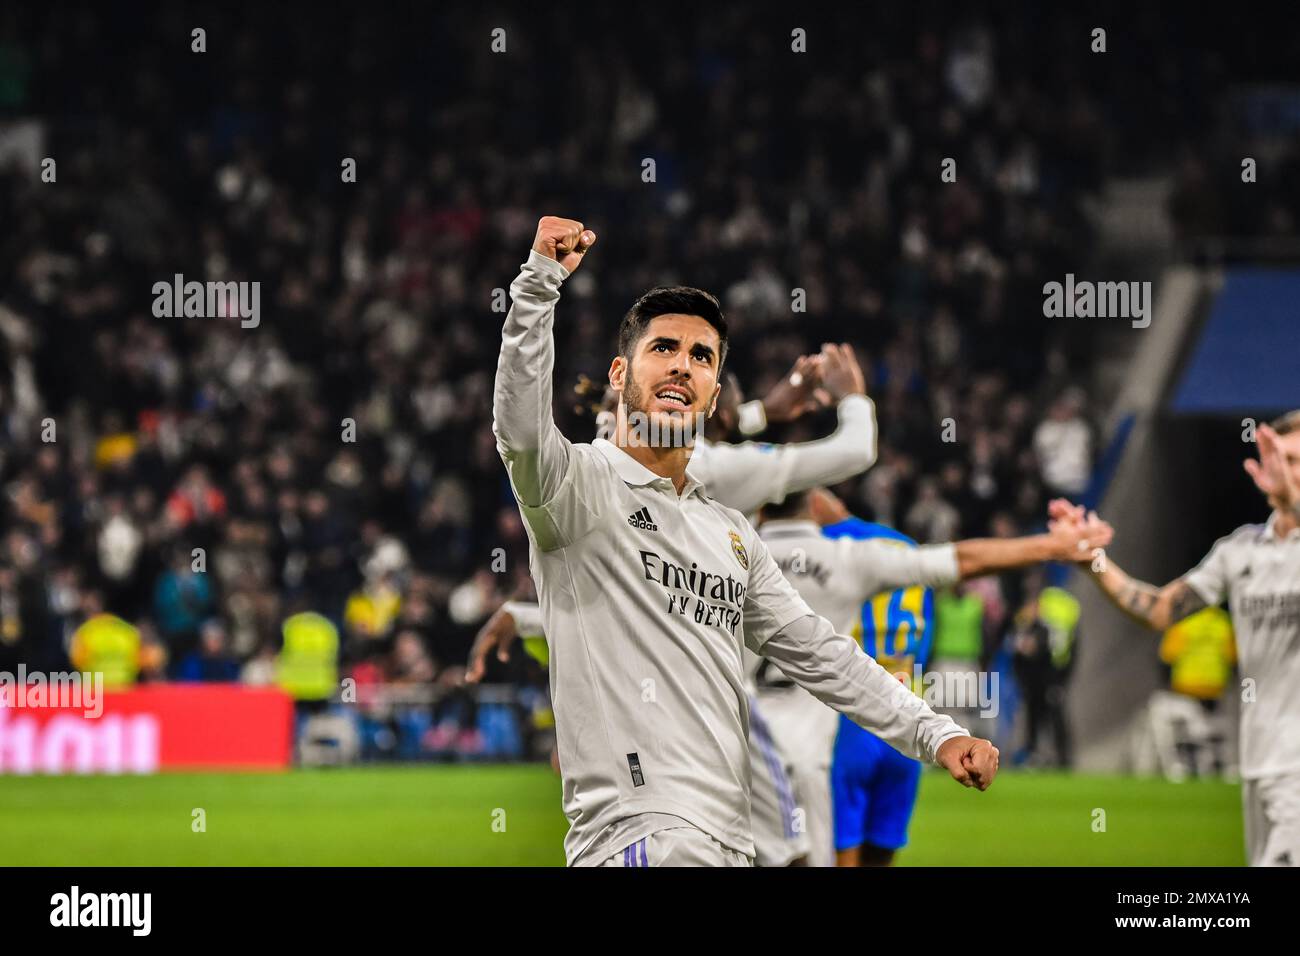 MADRID, SPAIN - FEBRUARY 2: Marco Asensio of Real Madrid CF celebration during the match between Real Madrid CF and Valencia CF of La Liga Santander on February 2, 2022 at Santiago Bernabeu of Madrid, Spain. (Photo by Samuel Carreño/ PX Images) Stock Photo